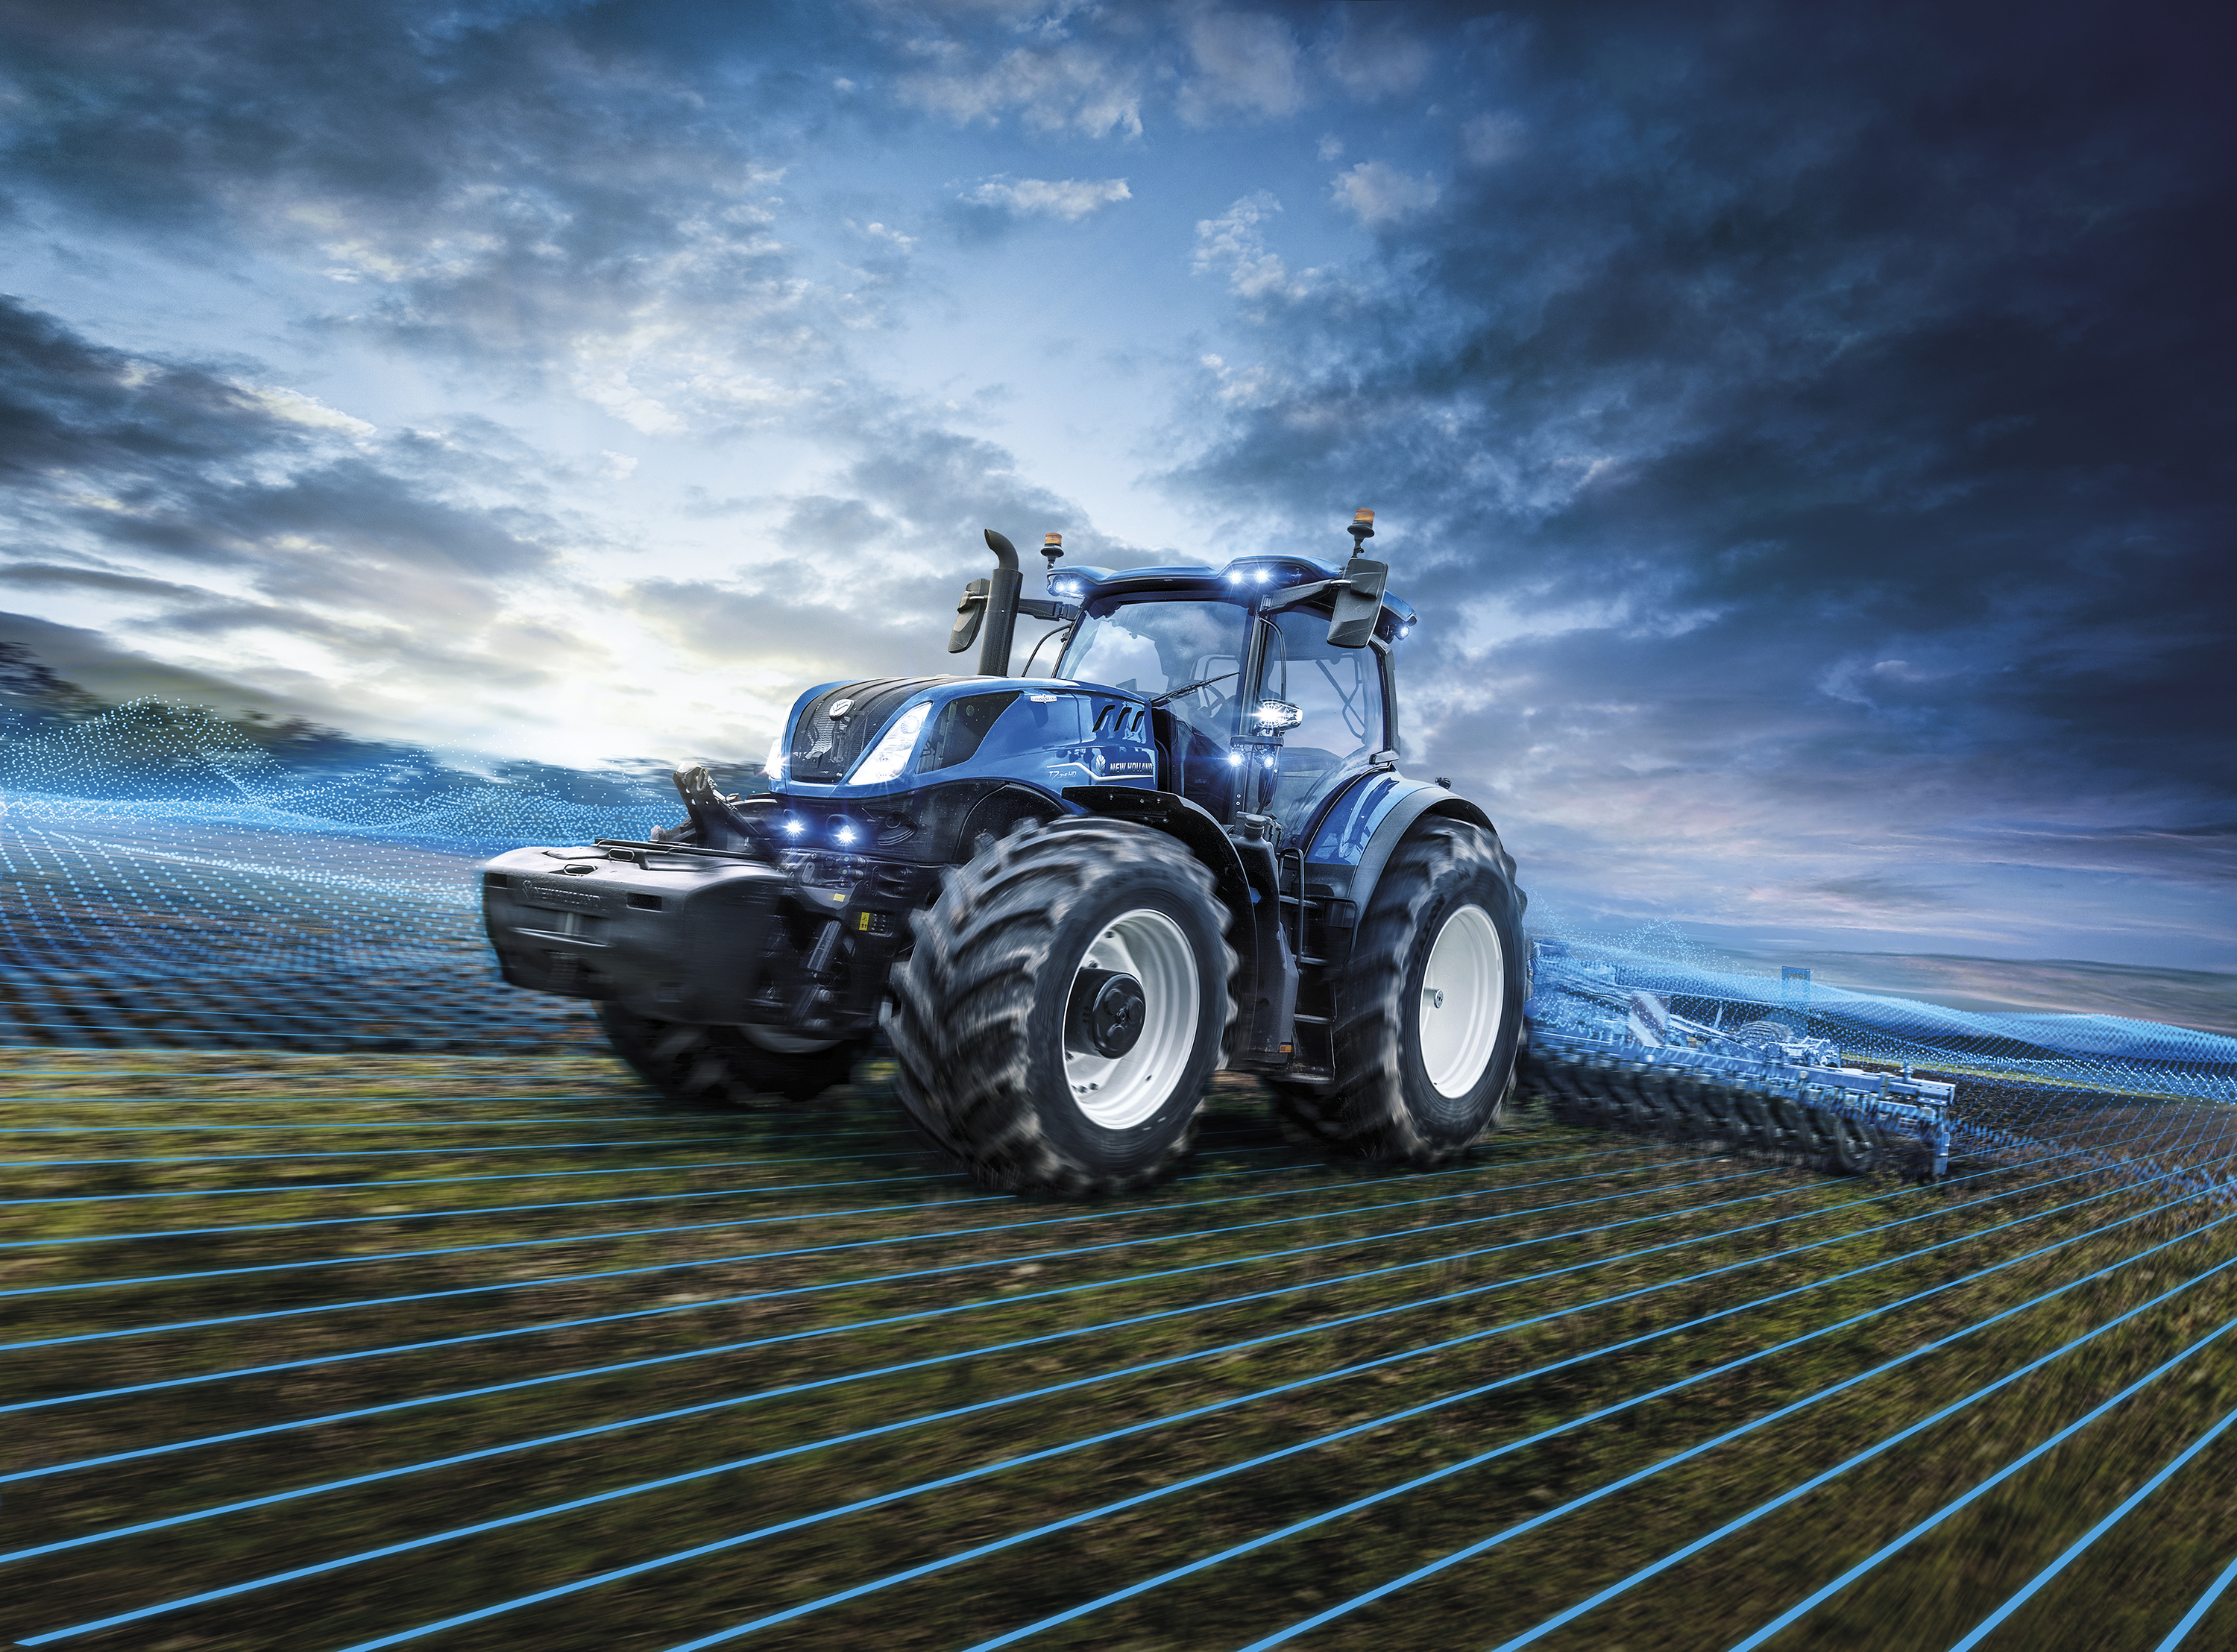 After talking to customers from a variety of farming backgrounds and from many markets the new T7 Heavy Duty with PLM Intelligence™ tractor is designed to meet today’s industry requirements. From its ease of use, compact dimensions, to the precision farming interface, and the extensive options list, whatever your work, the new T7 Heavy Duty will step up.